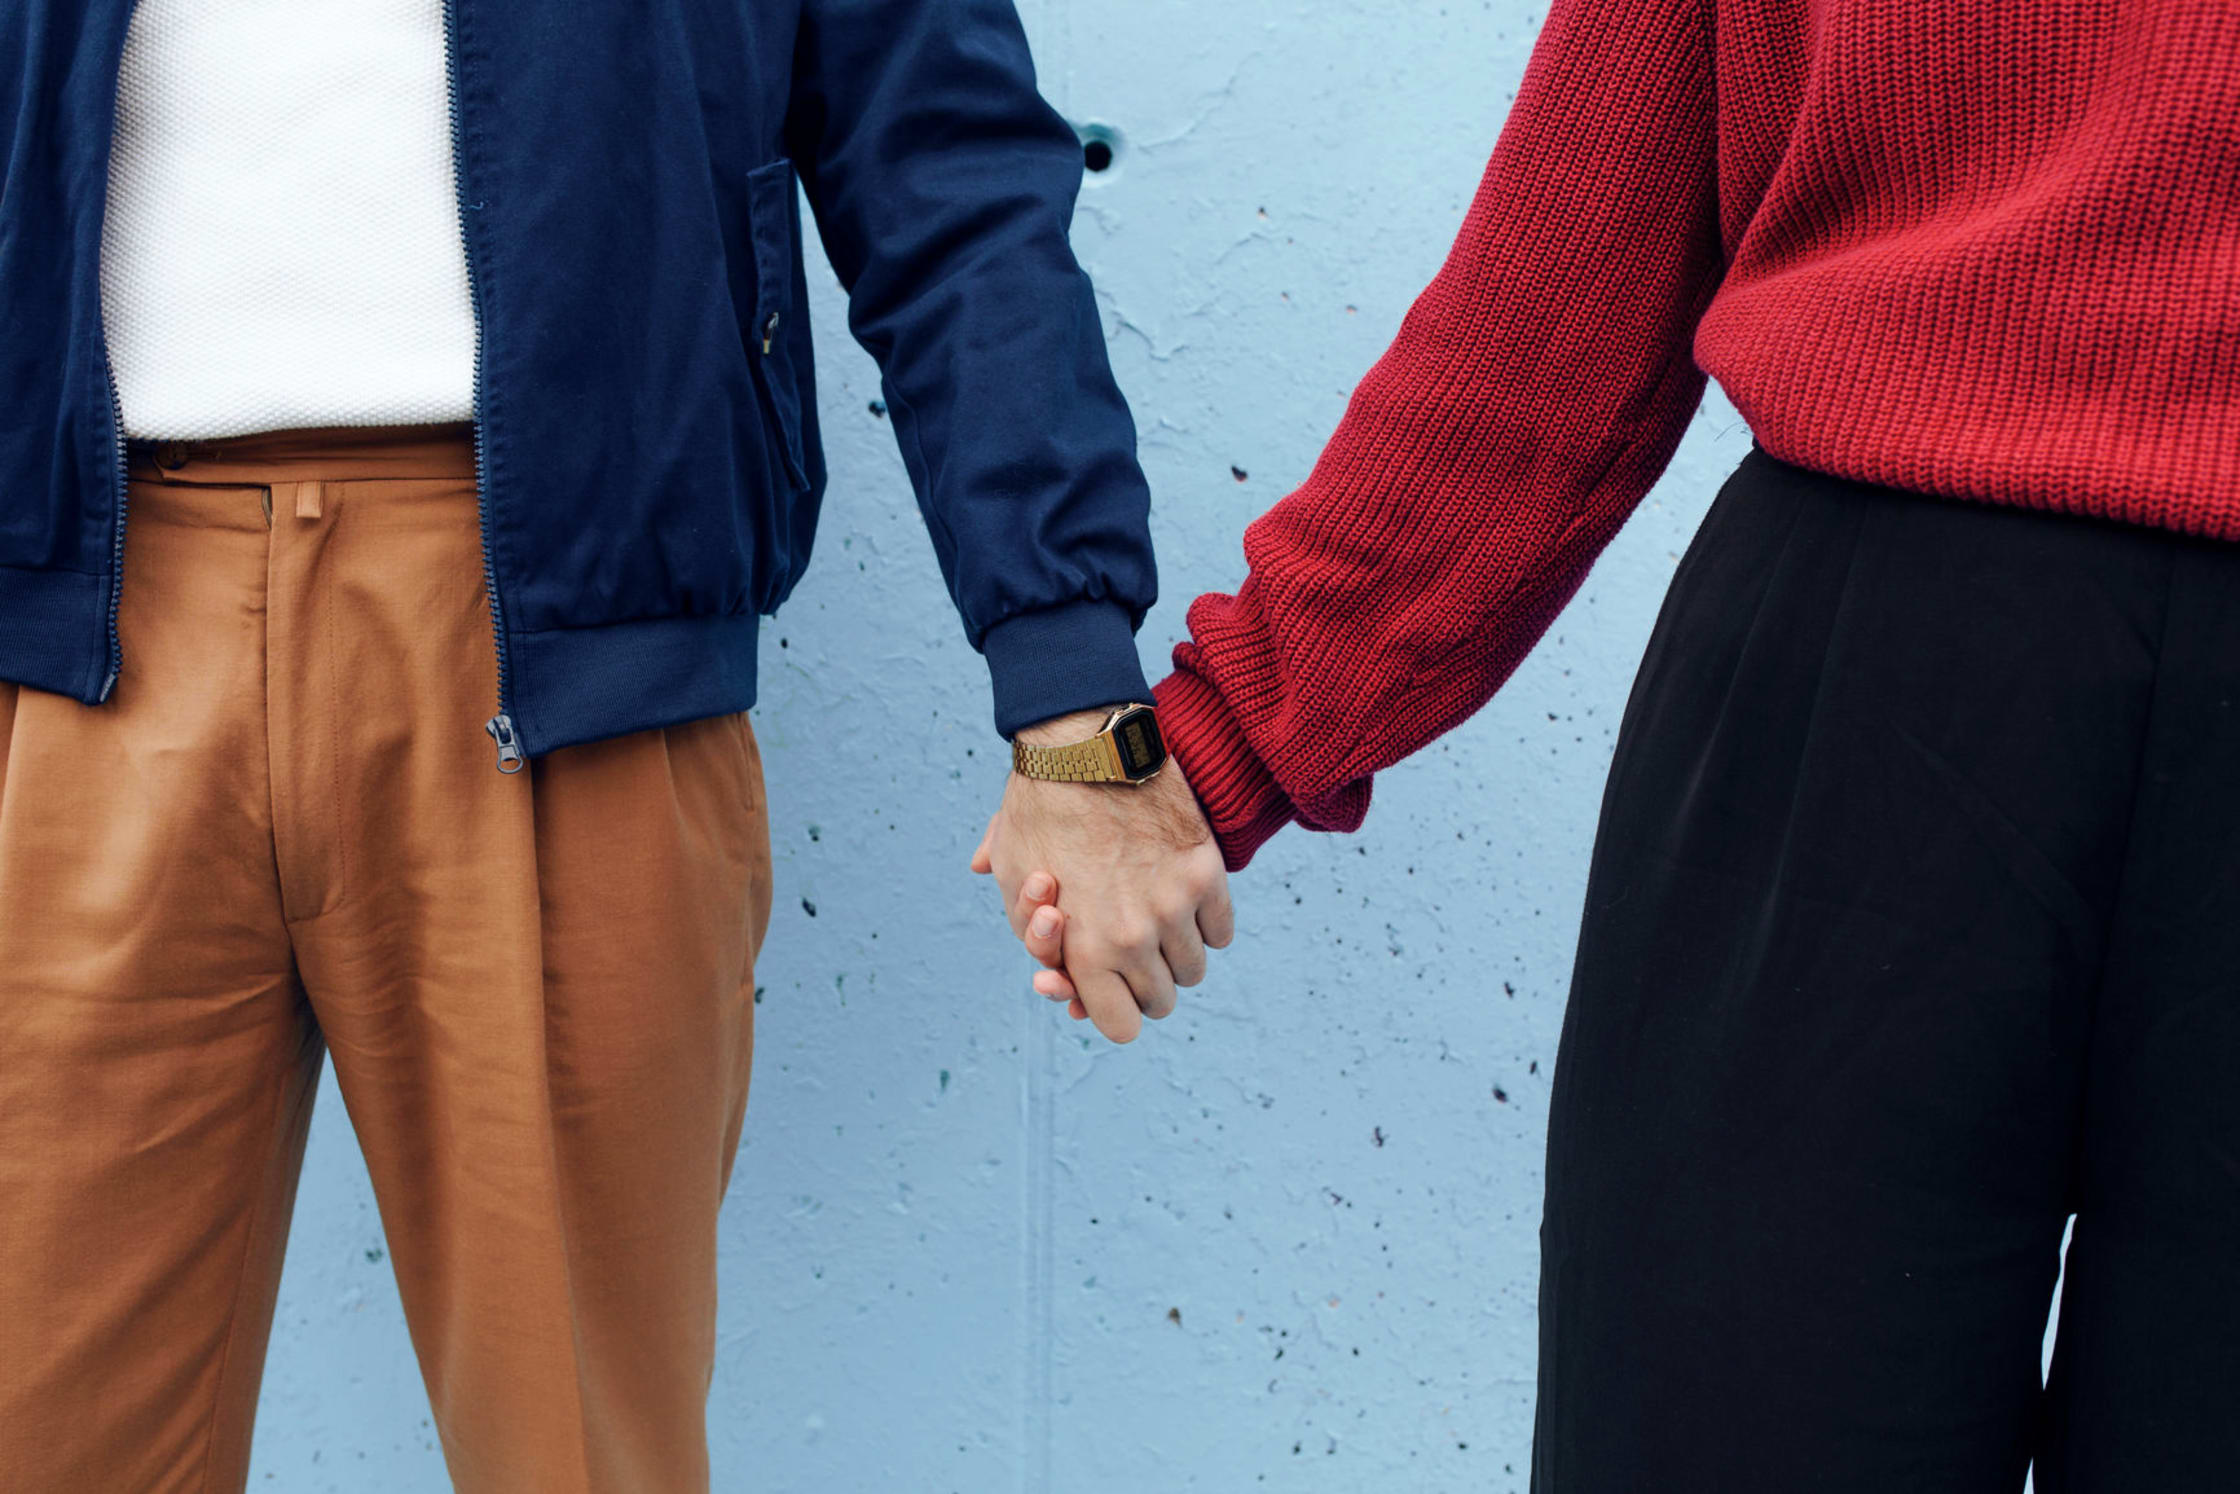 How To Connect Better With Your Partner, According To Neuroscience